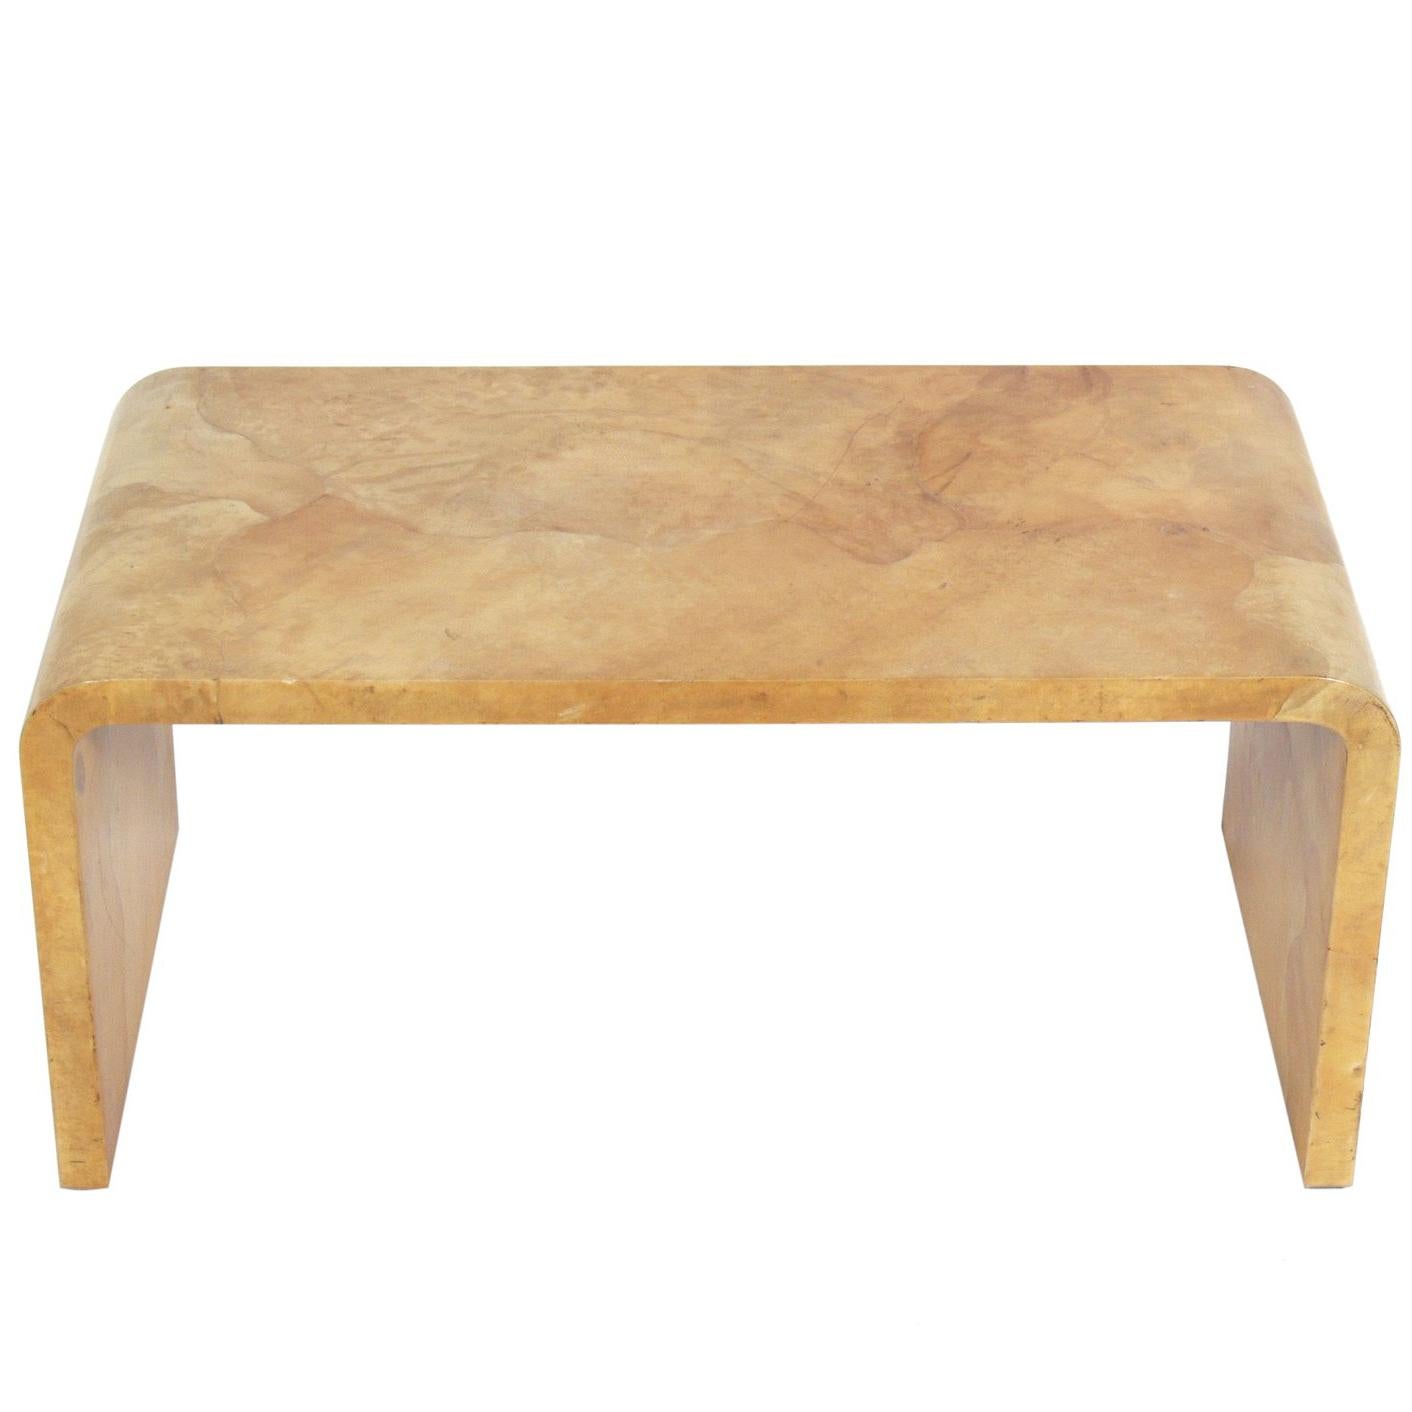 Karl Springer Lacquered Goatskin Coffee Table